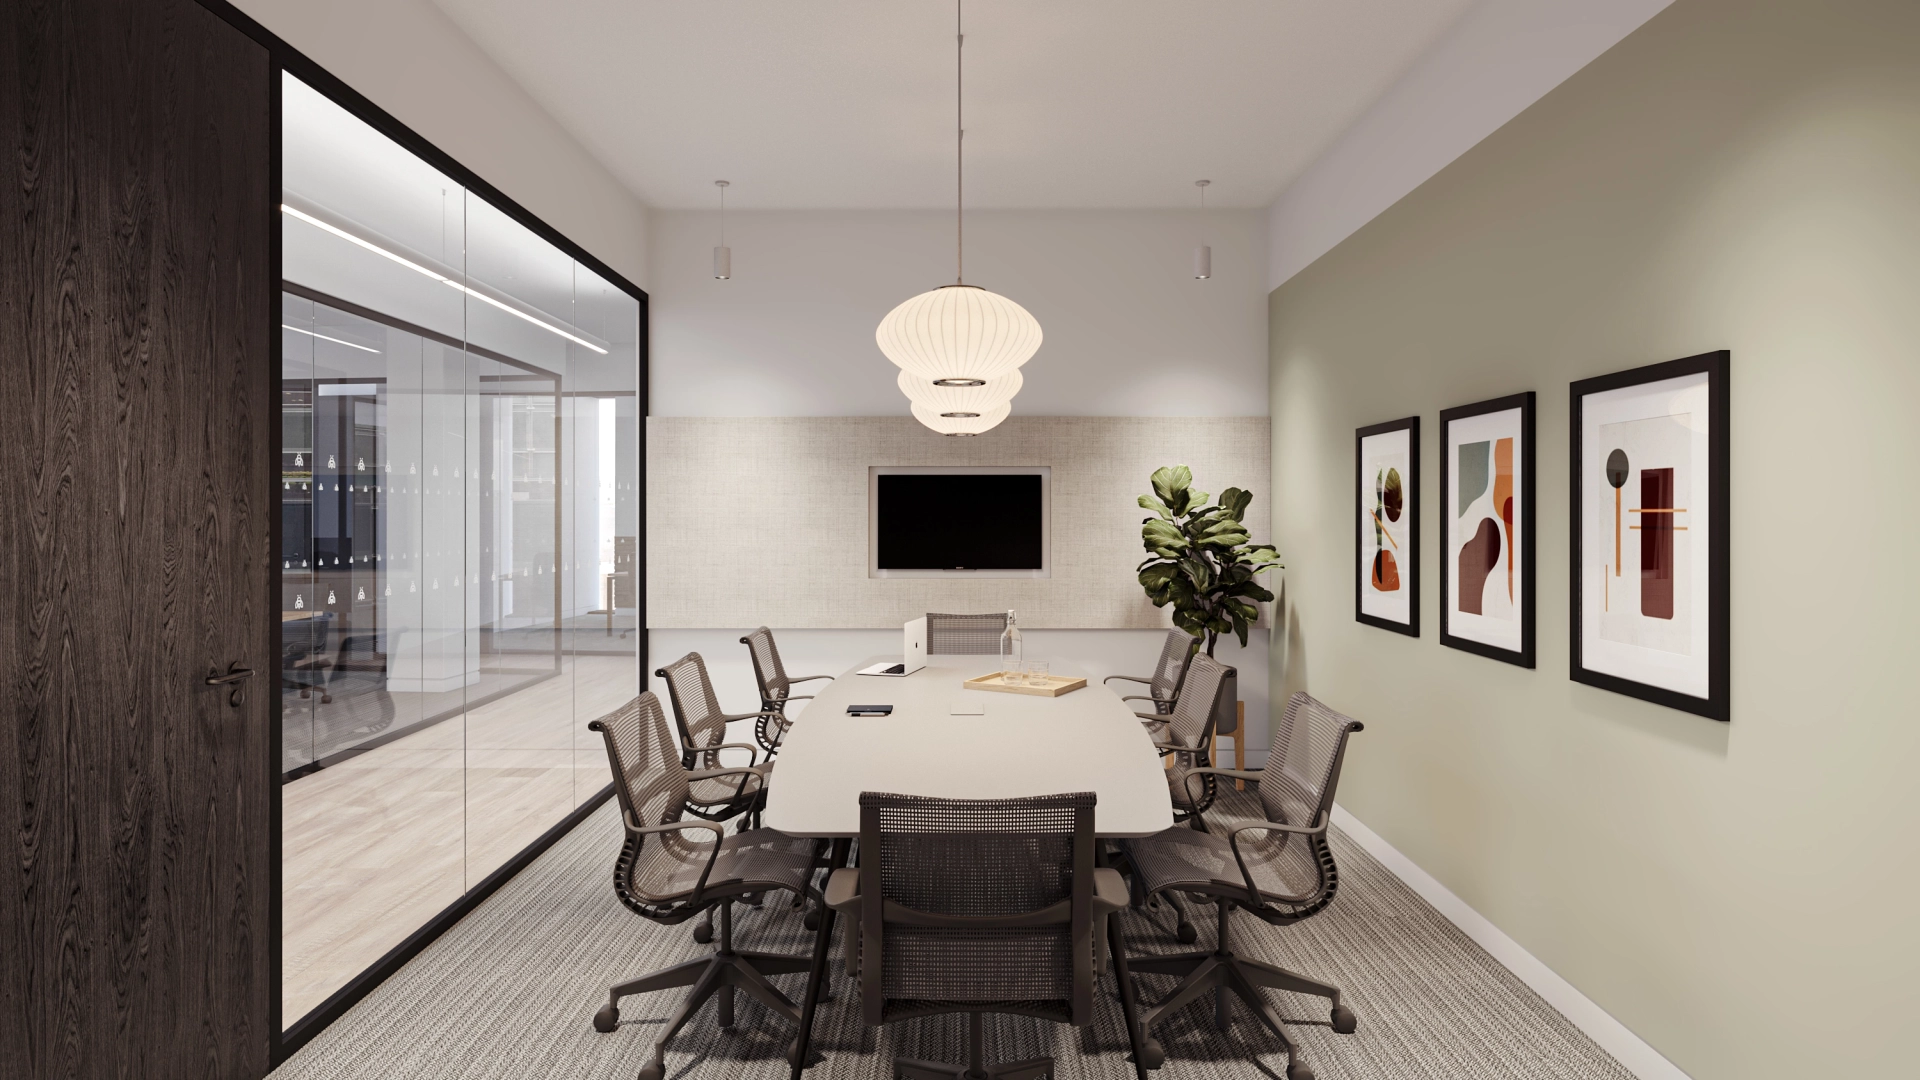 A rendering of an office meeting room in London.